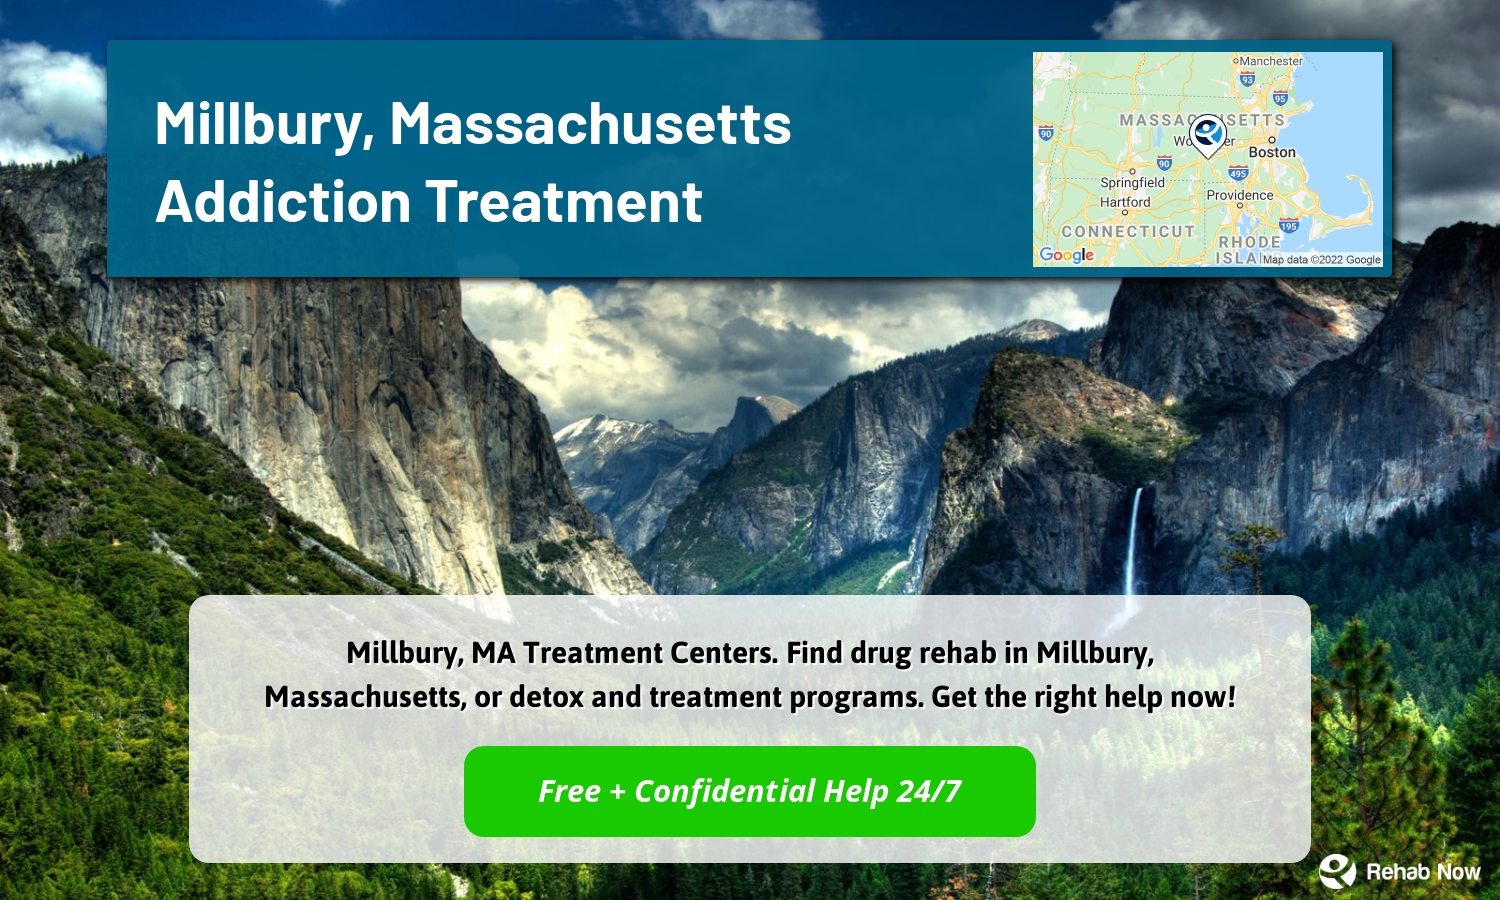 Millbury, MA Treatment Centers. Find drug rehab in Millbury, Massachusetts, or detox and treatment programs. Get the right help now!